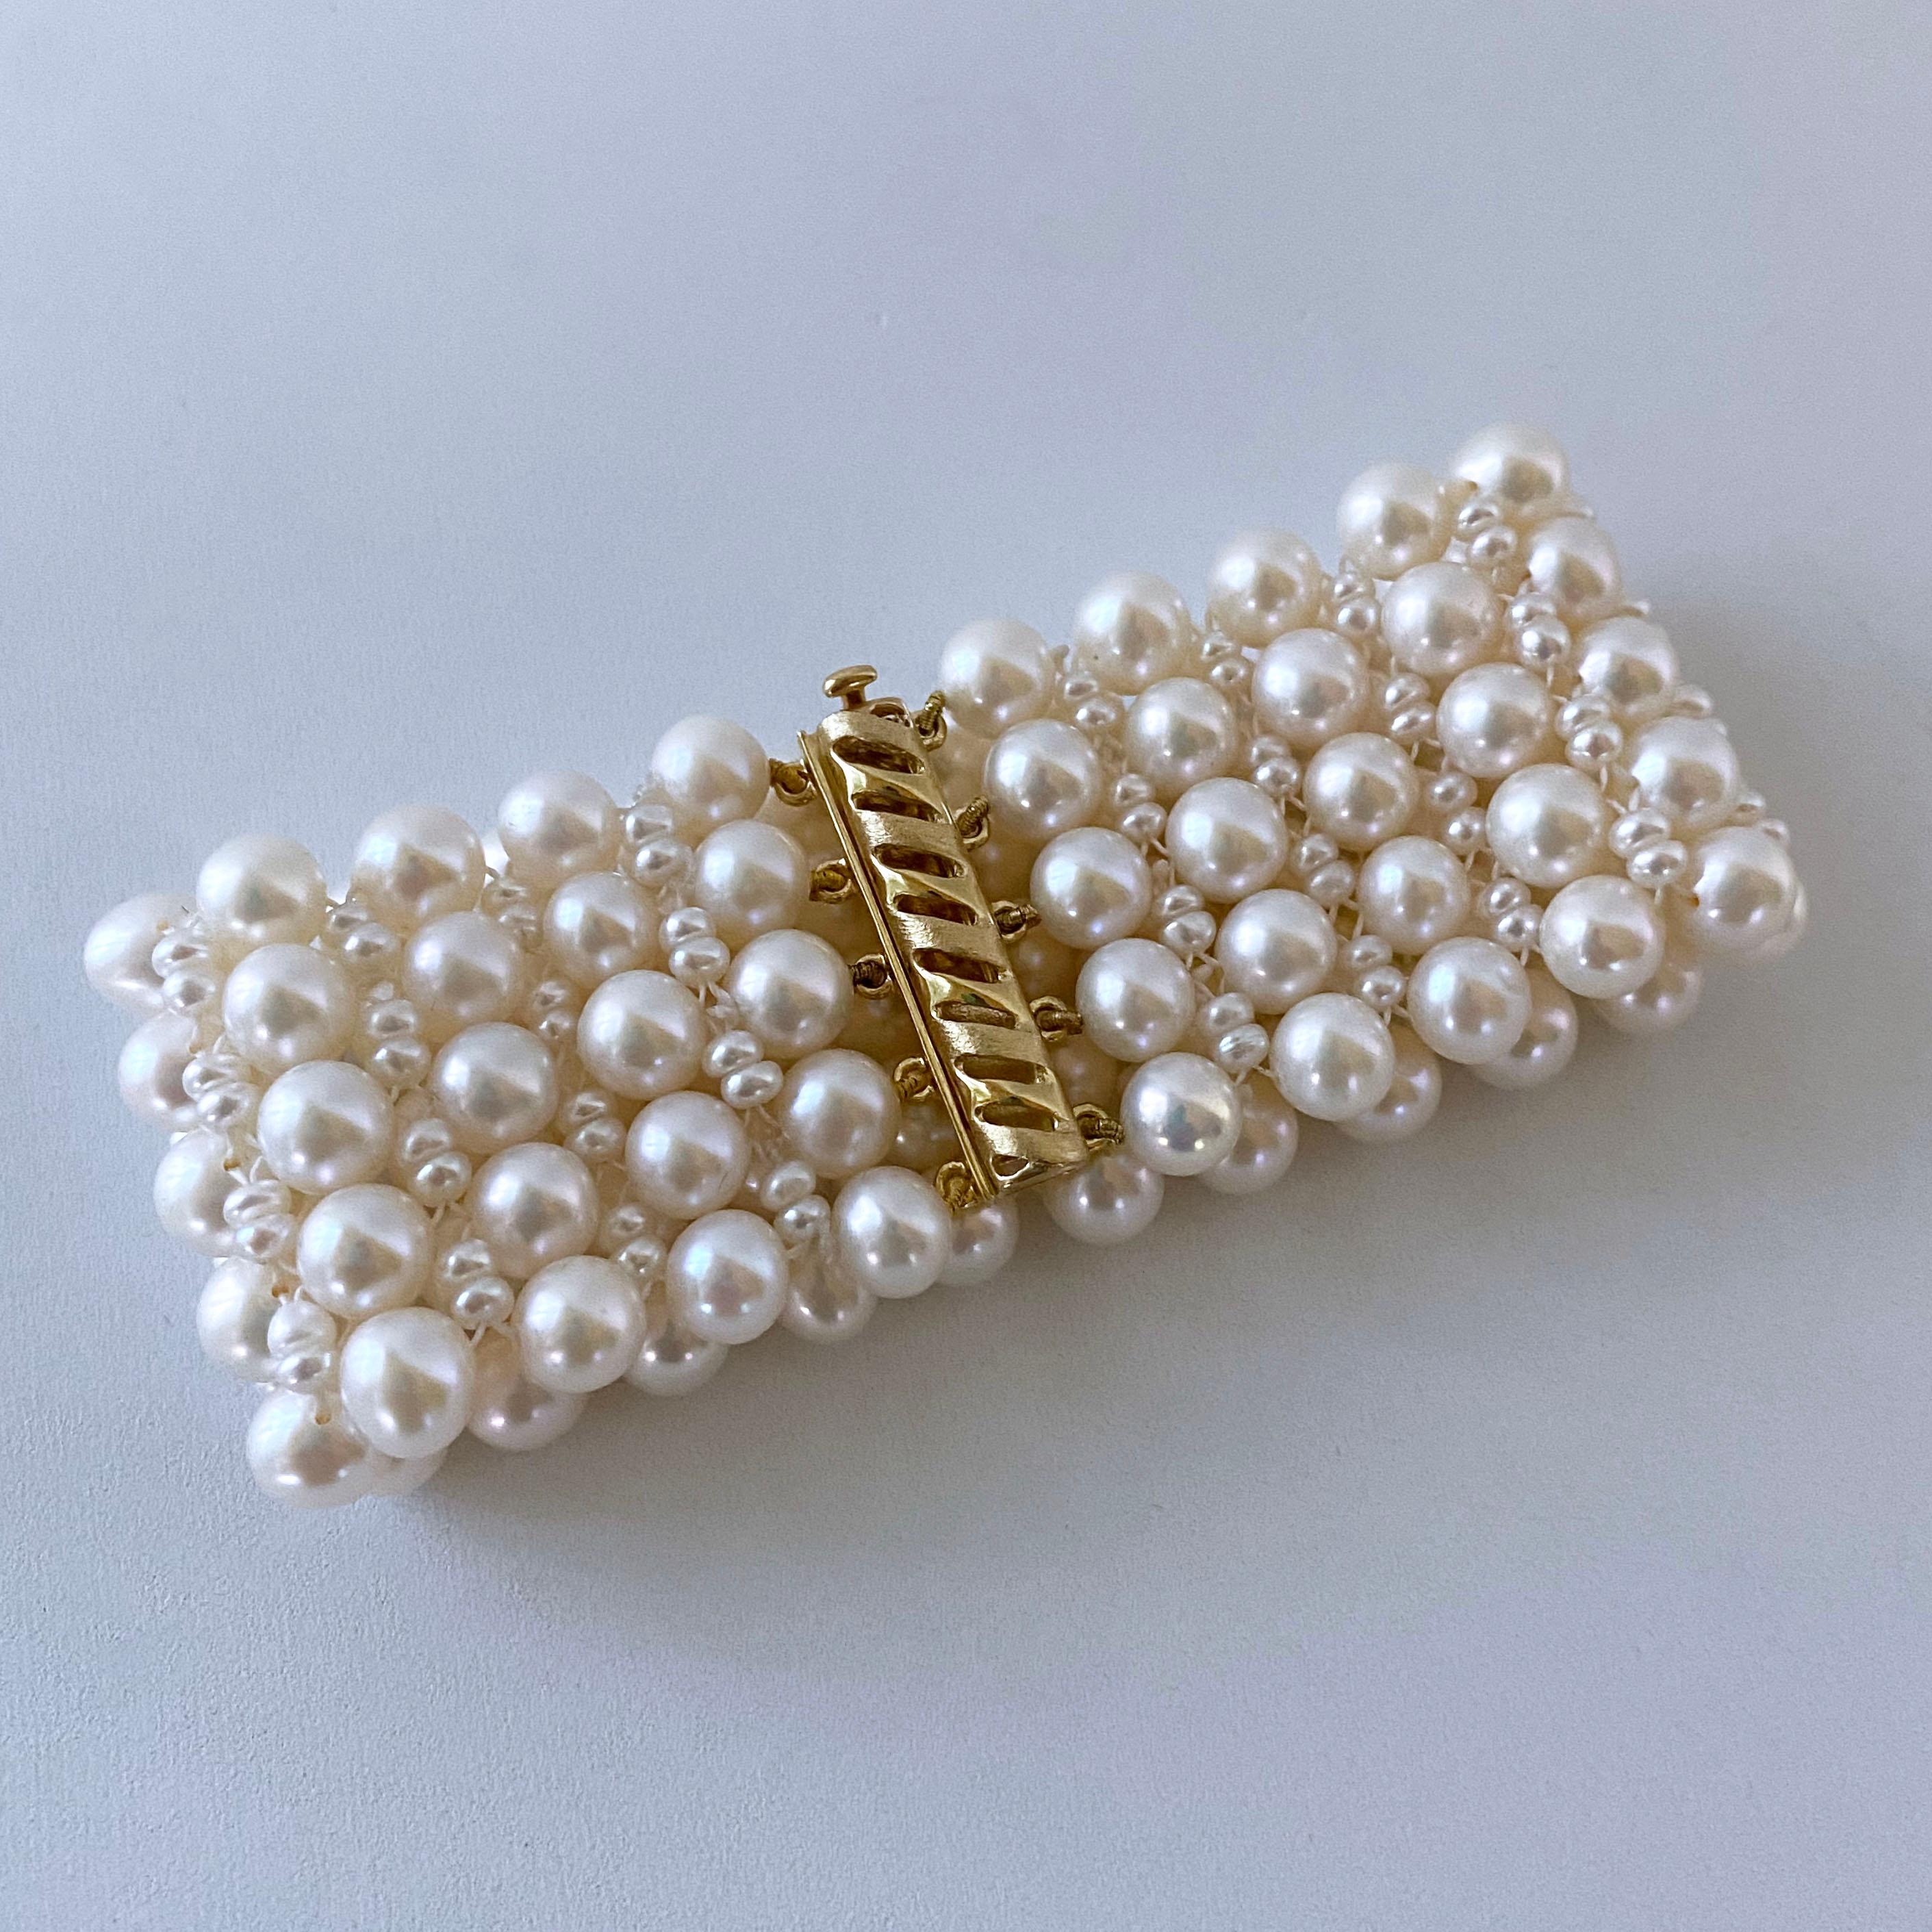 Marina J. Woven Pearl Bracelet with 14k Yellow Gold Plated Silver Sliding Clasp For Sale 3